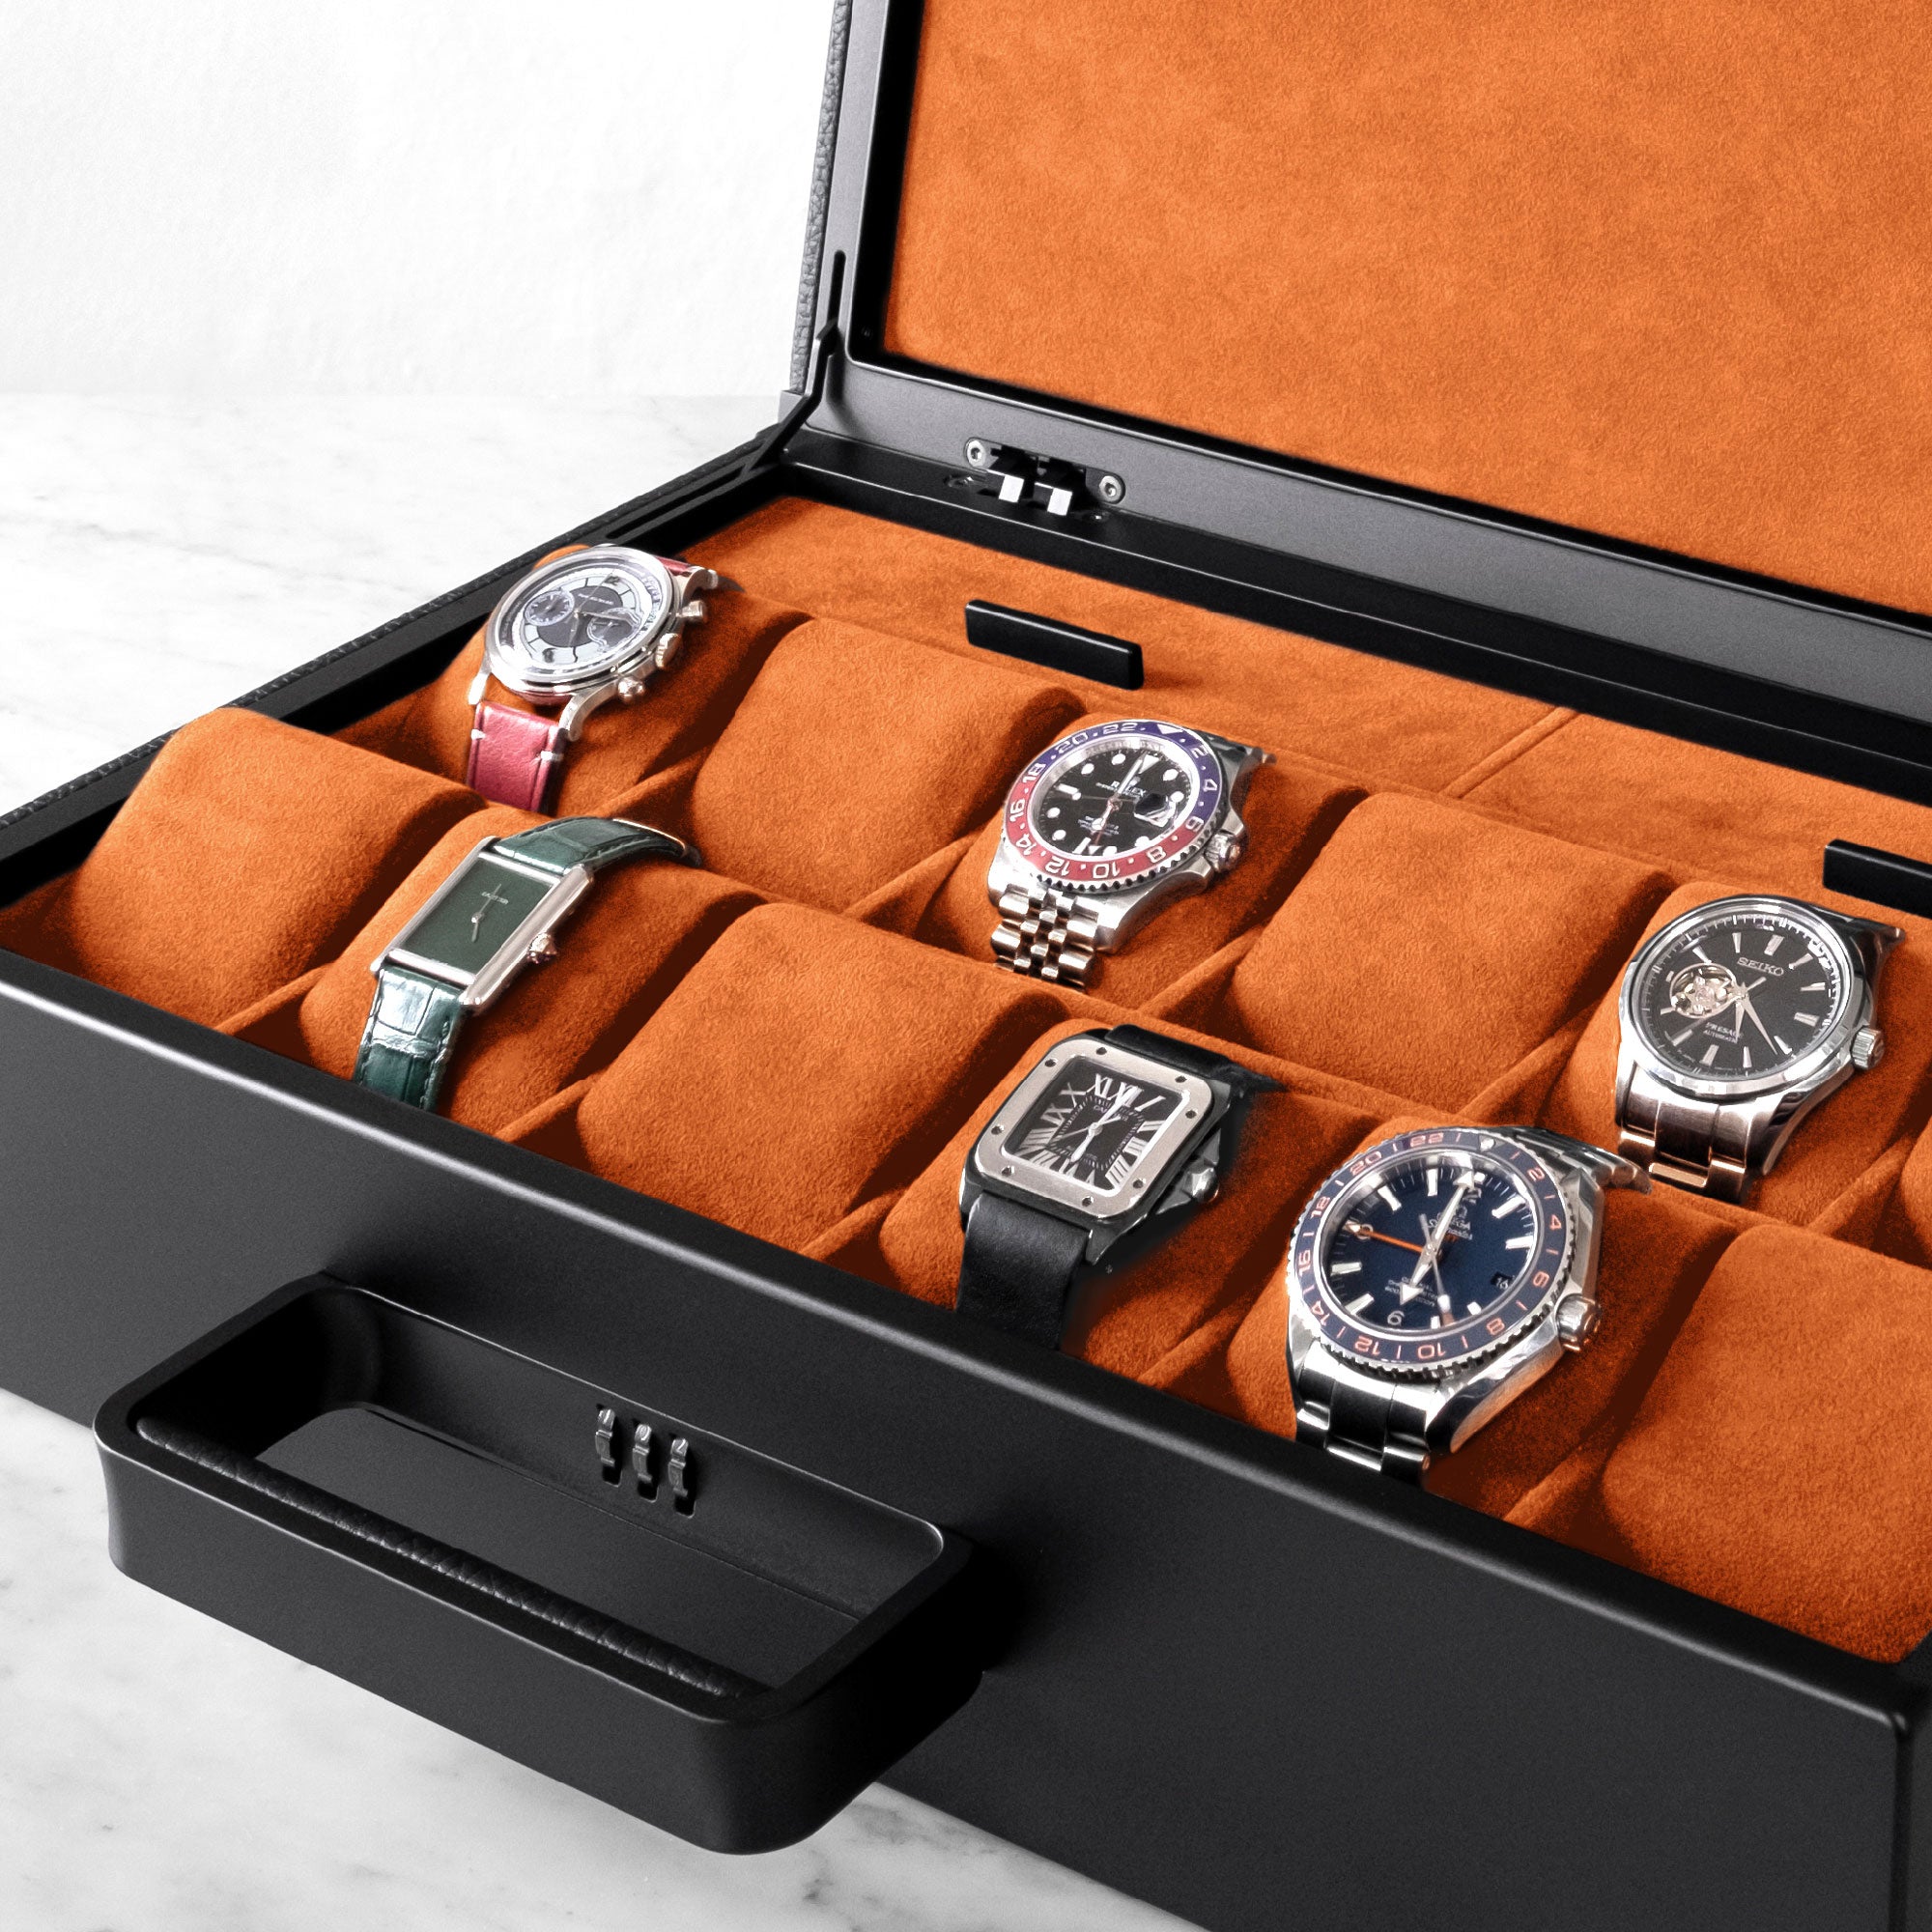 Designer Watch briefcase for 12 watches in black leather, black carbon fiber and anodized aluminum and papaya Alcantara interior handmade to hold a watch collection